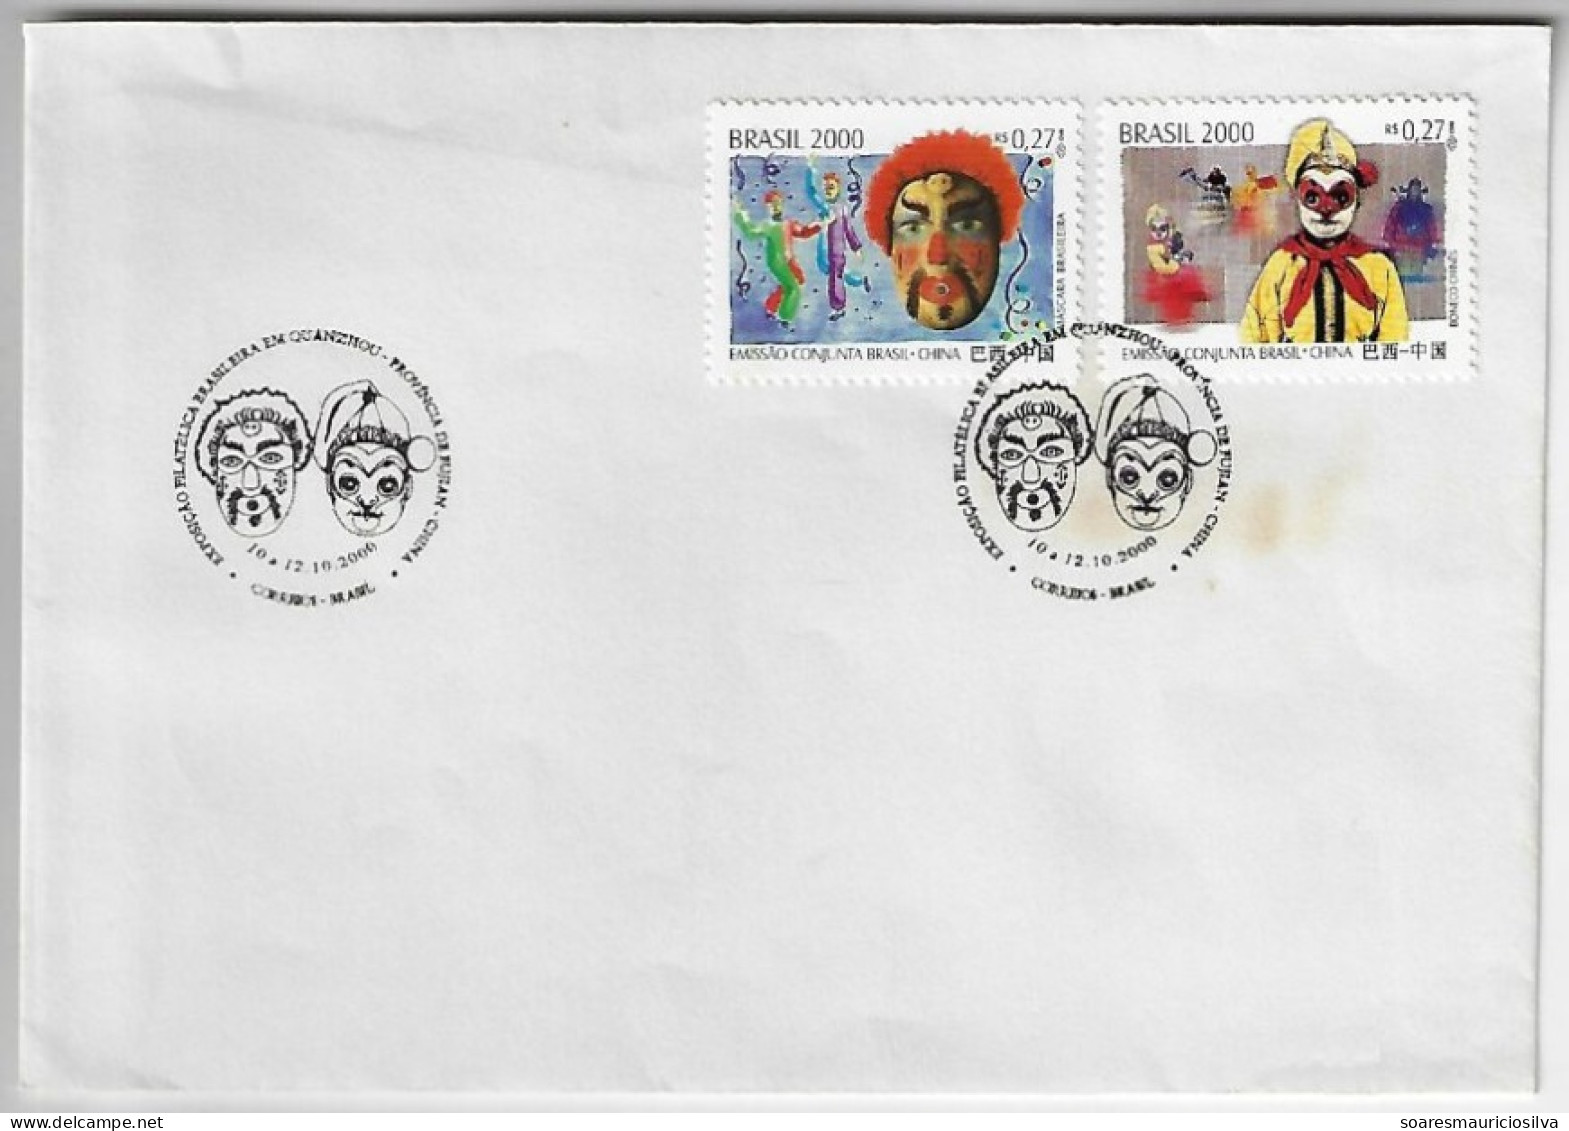 2000 2 Cover Stamp Joint Issue Brazil China 25 Years Diplomatic Relations Between Countries Brazilian Mask Chinese Doll - Brieven En Documenten